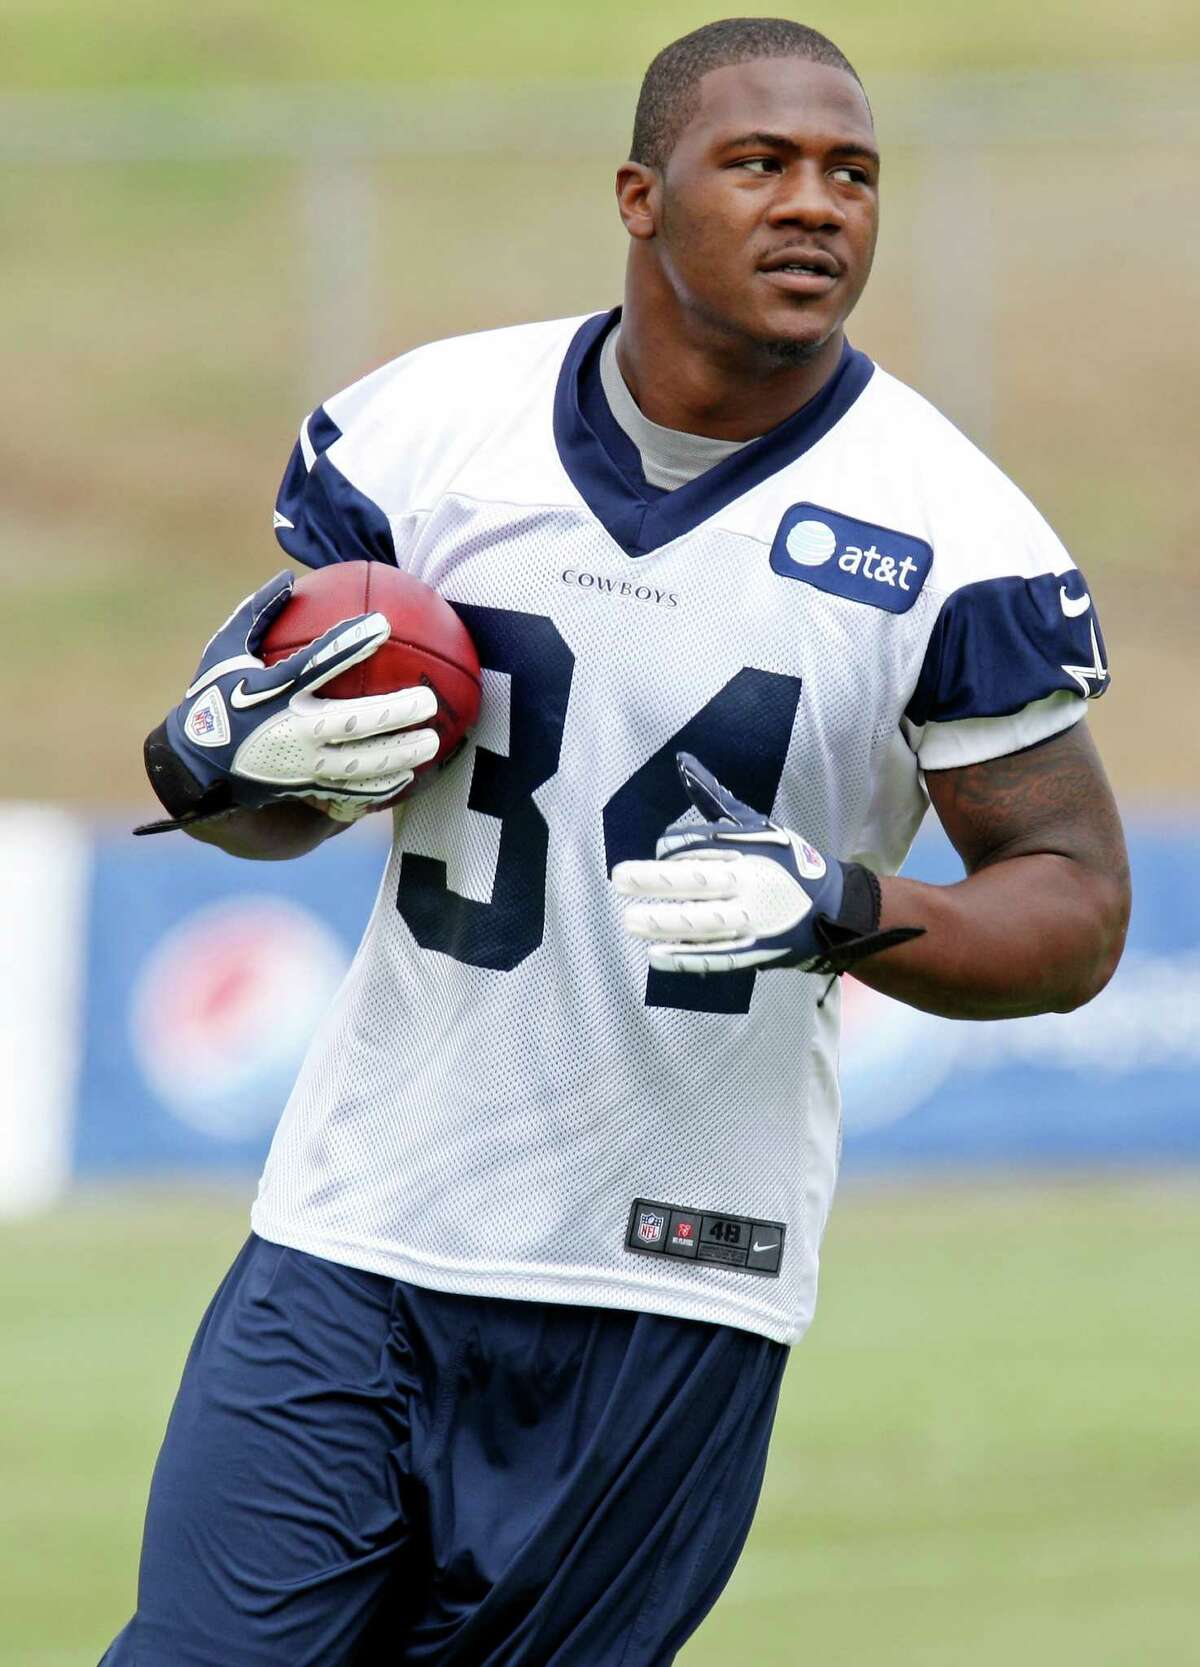 Dallas Cowboys running back Phillip Tanner runs a play during 2012 training camp held Tuesday July 31, 2012 in Oxnard, CA.